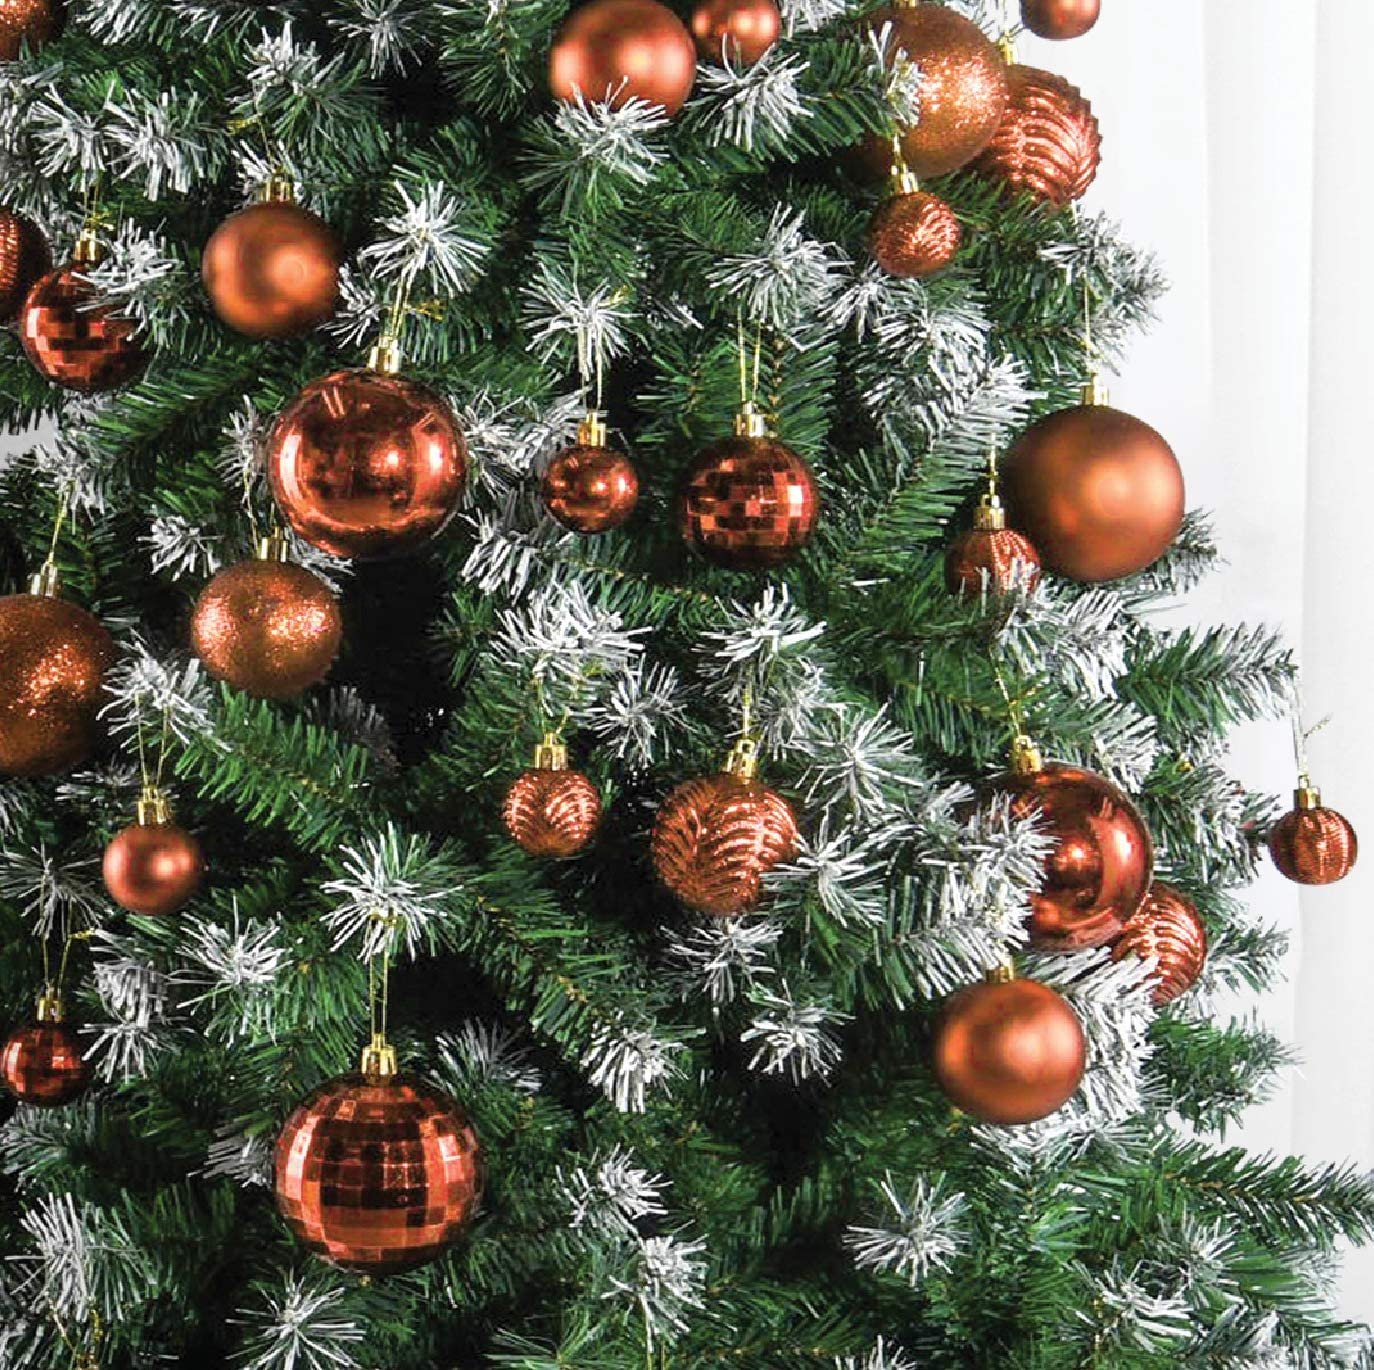 36 Shatterproof Copper Orange Christmas Ball Ornaments w/ Hanging Loop - 3 Size Combo - Free Shipping